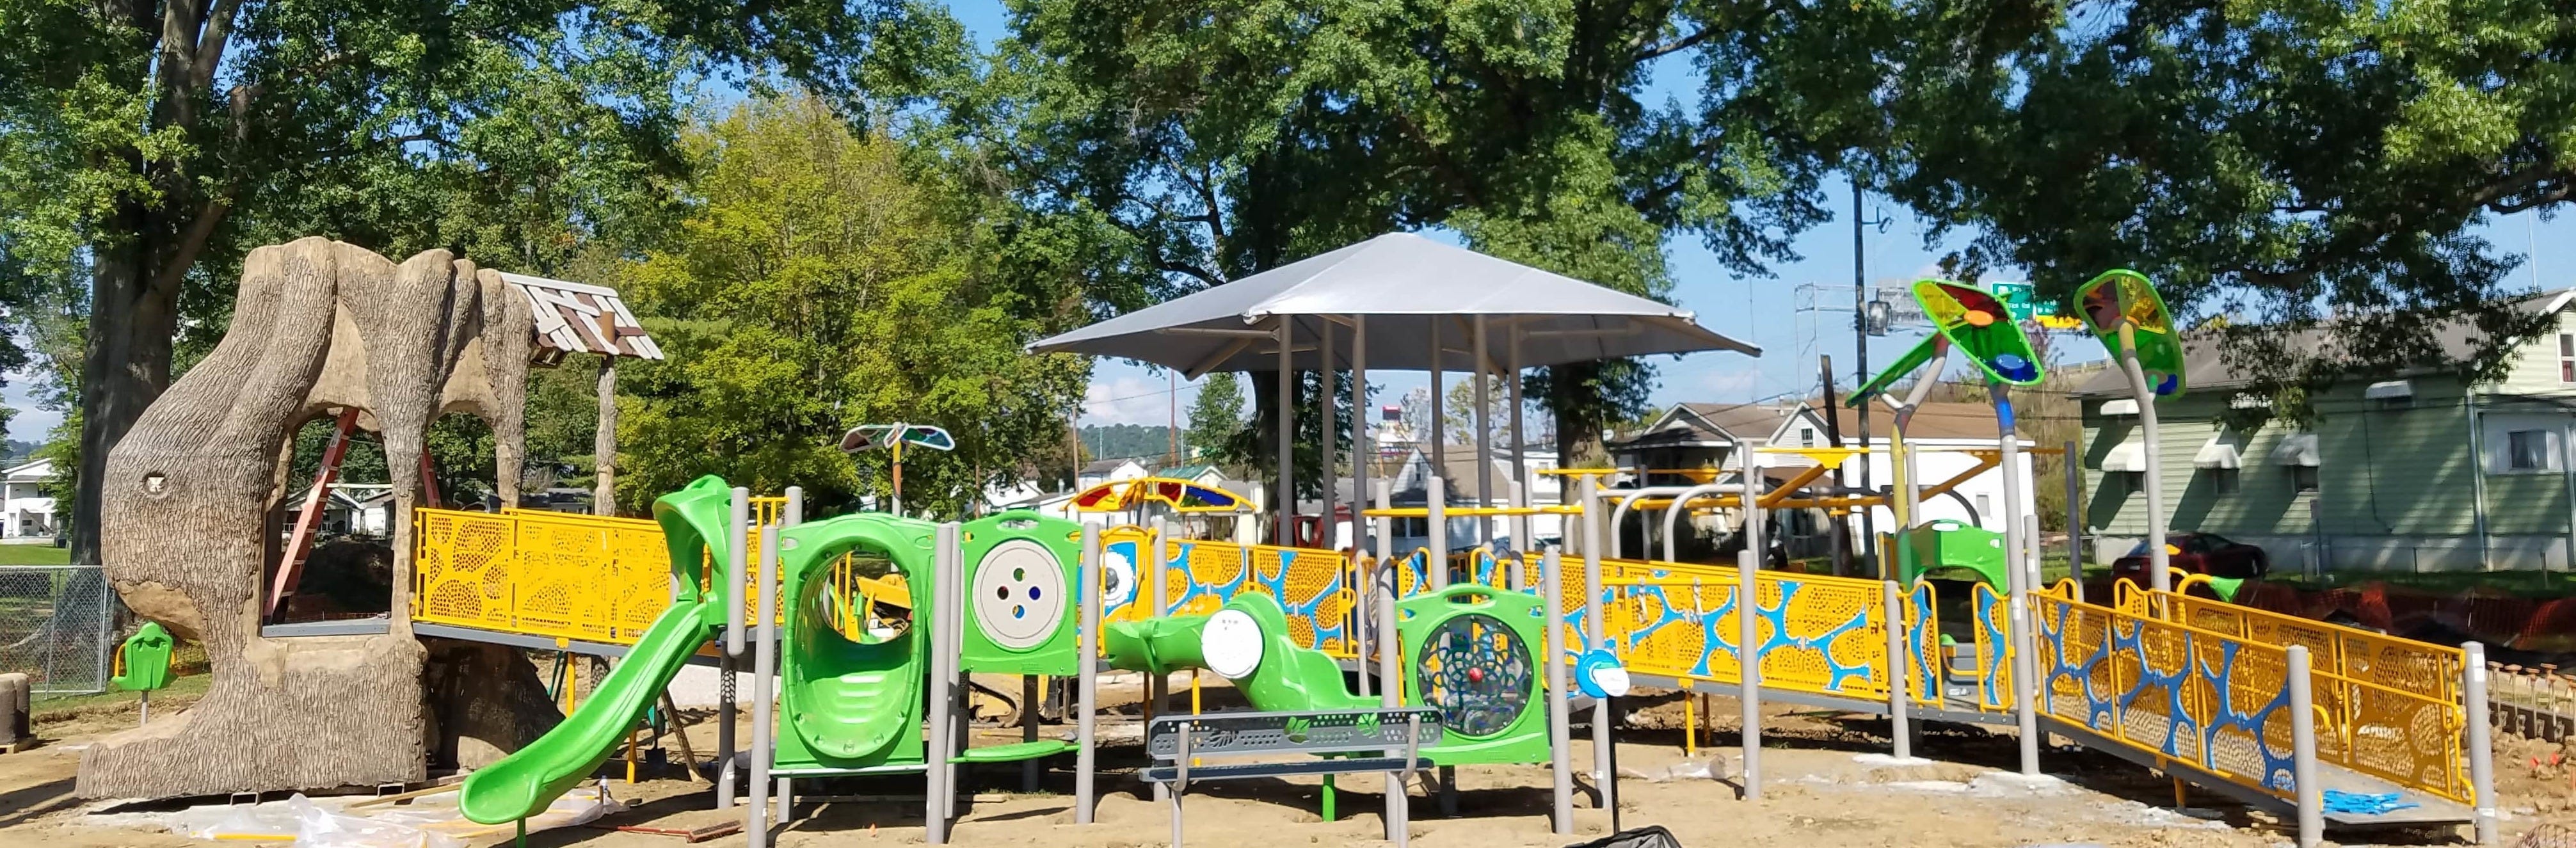 GameTime Nears Completion of West Virginia's First Inclusive Playground